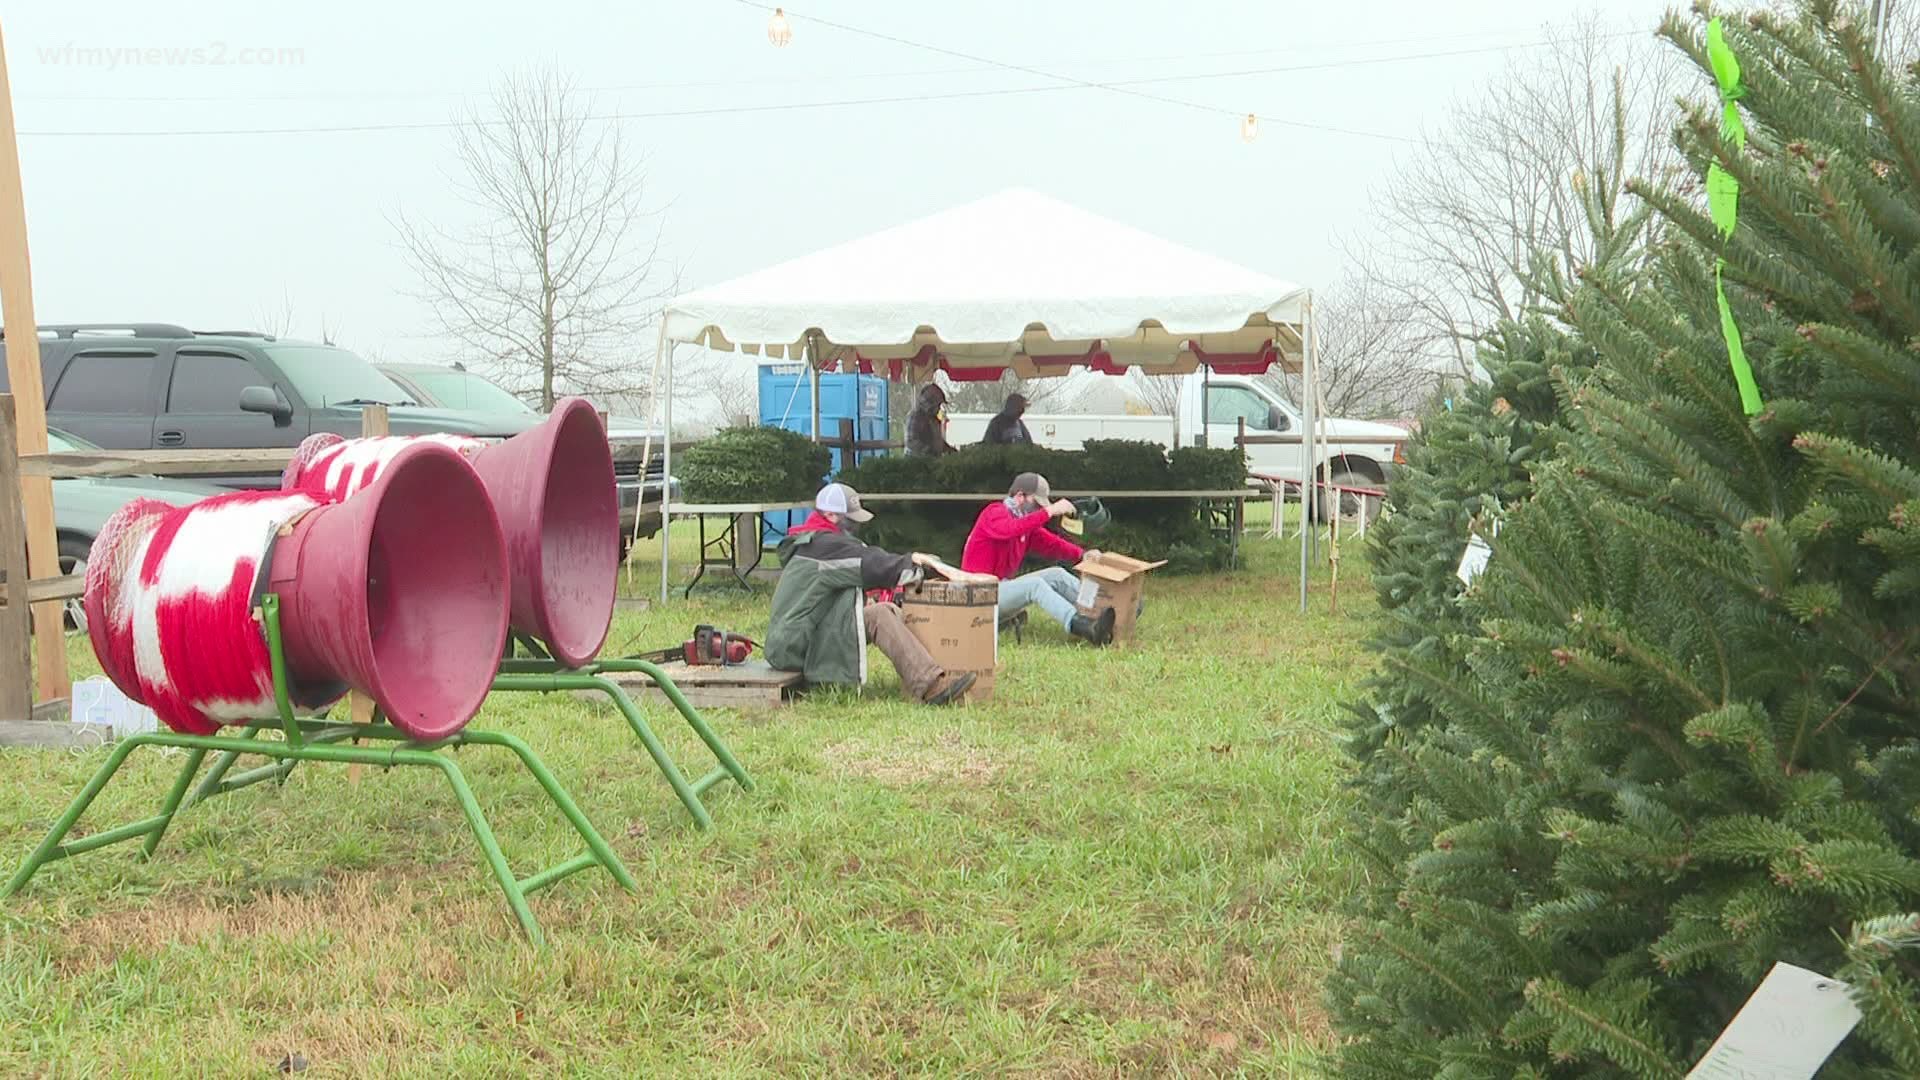 The Wagoner family has been selling Christmas trees in the Triad for over 35 years.